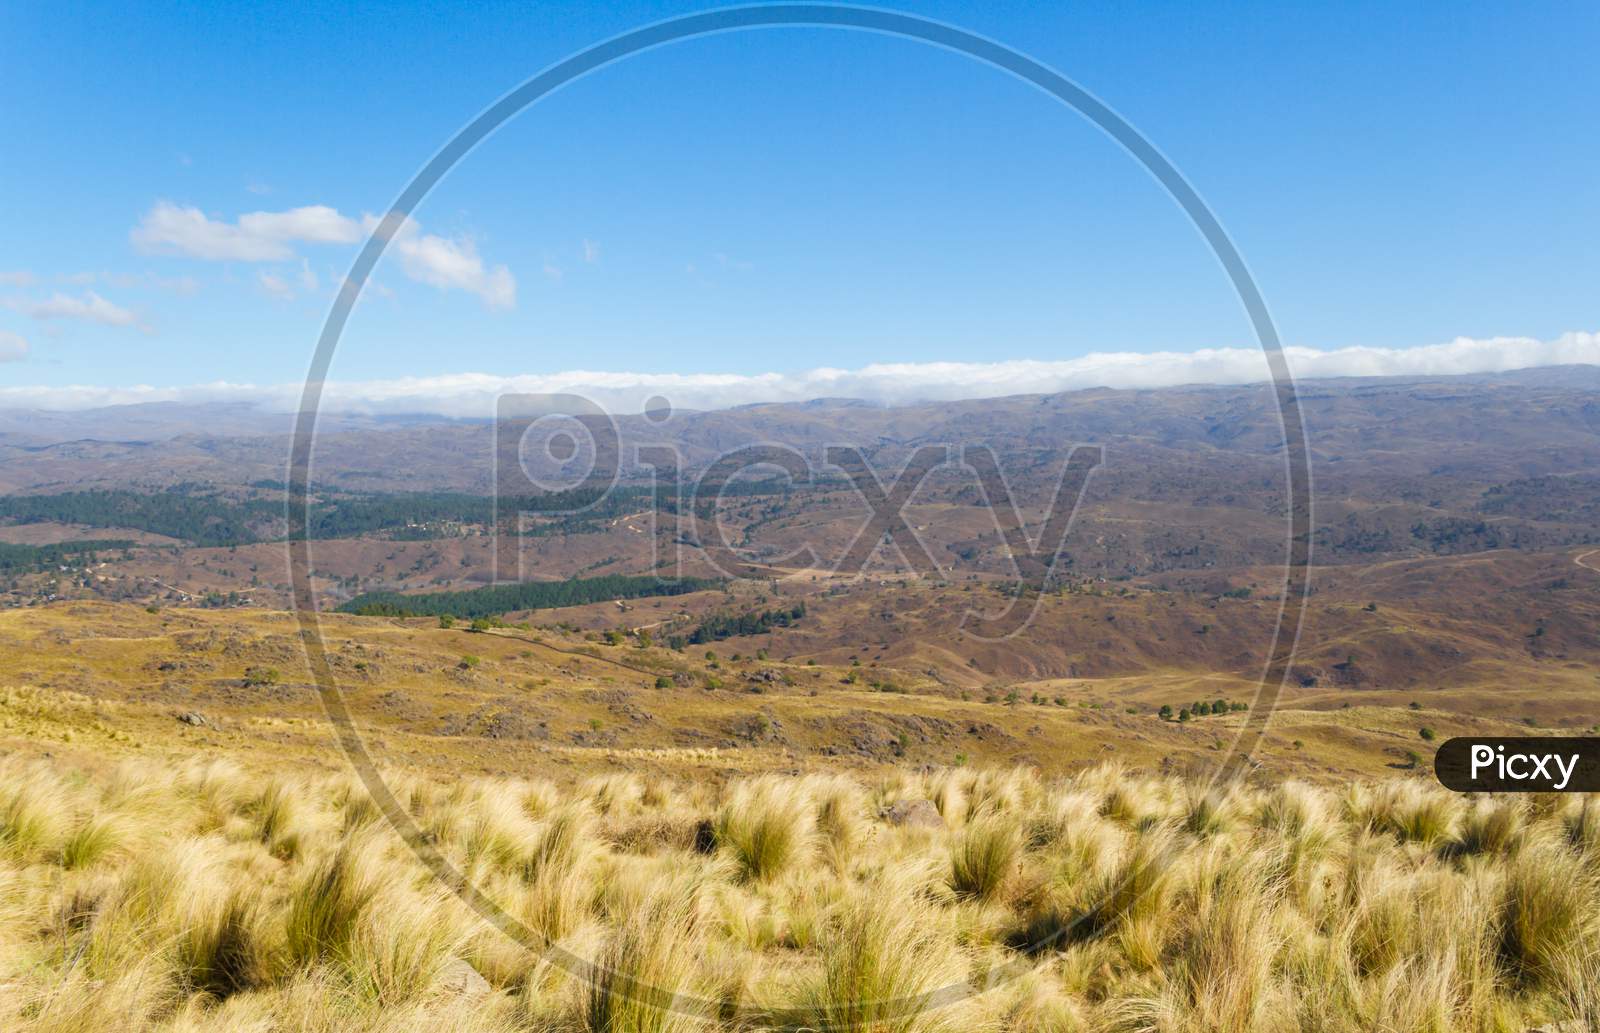 Landscape Of Mountains In Cordoba Argentina In Autumn